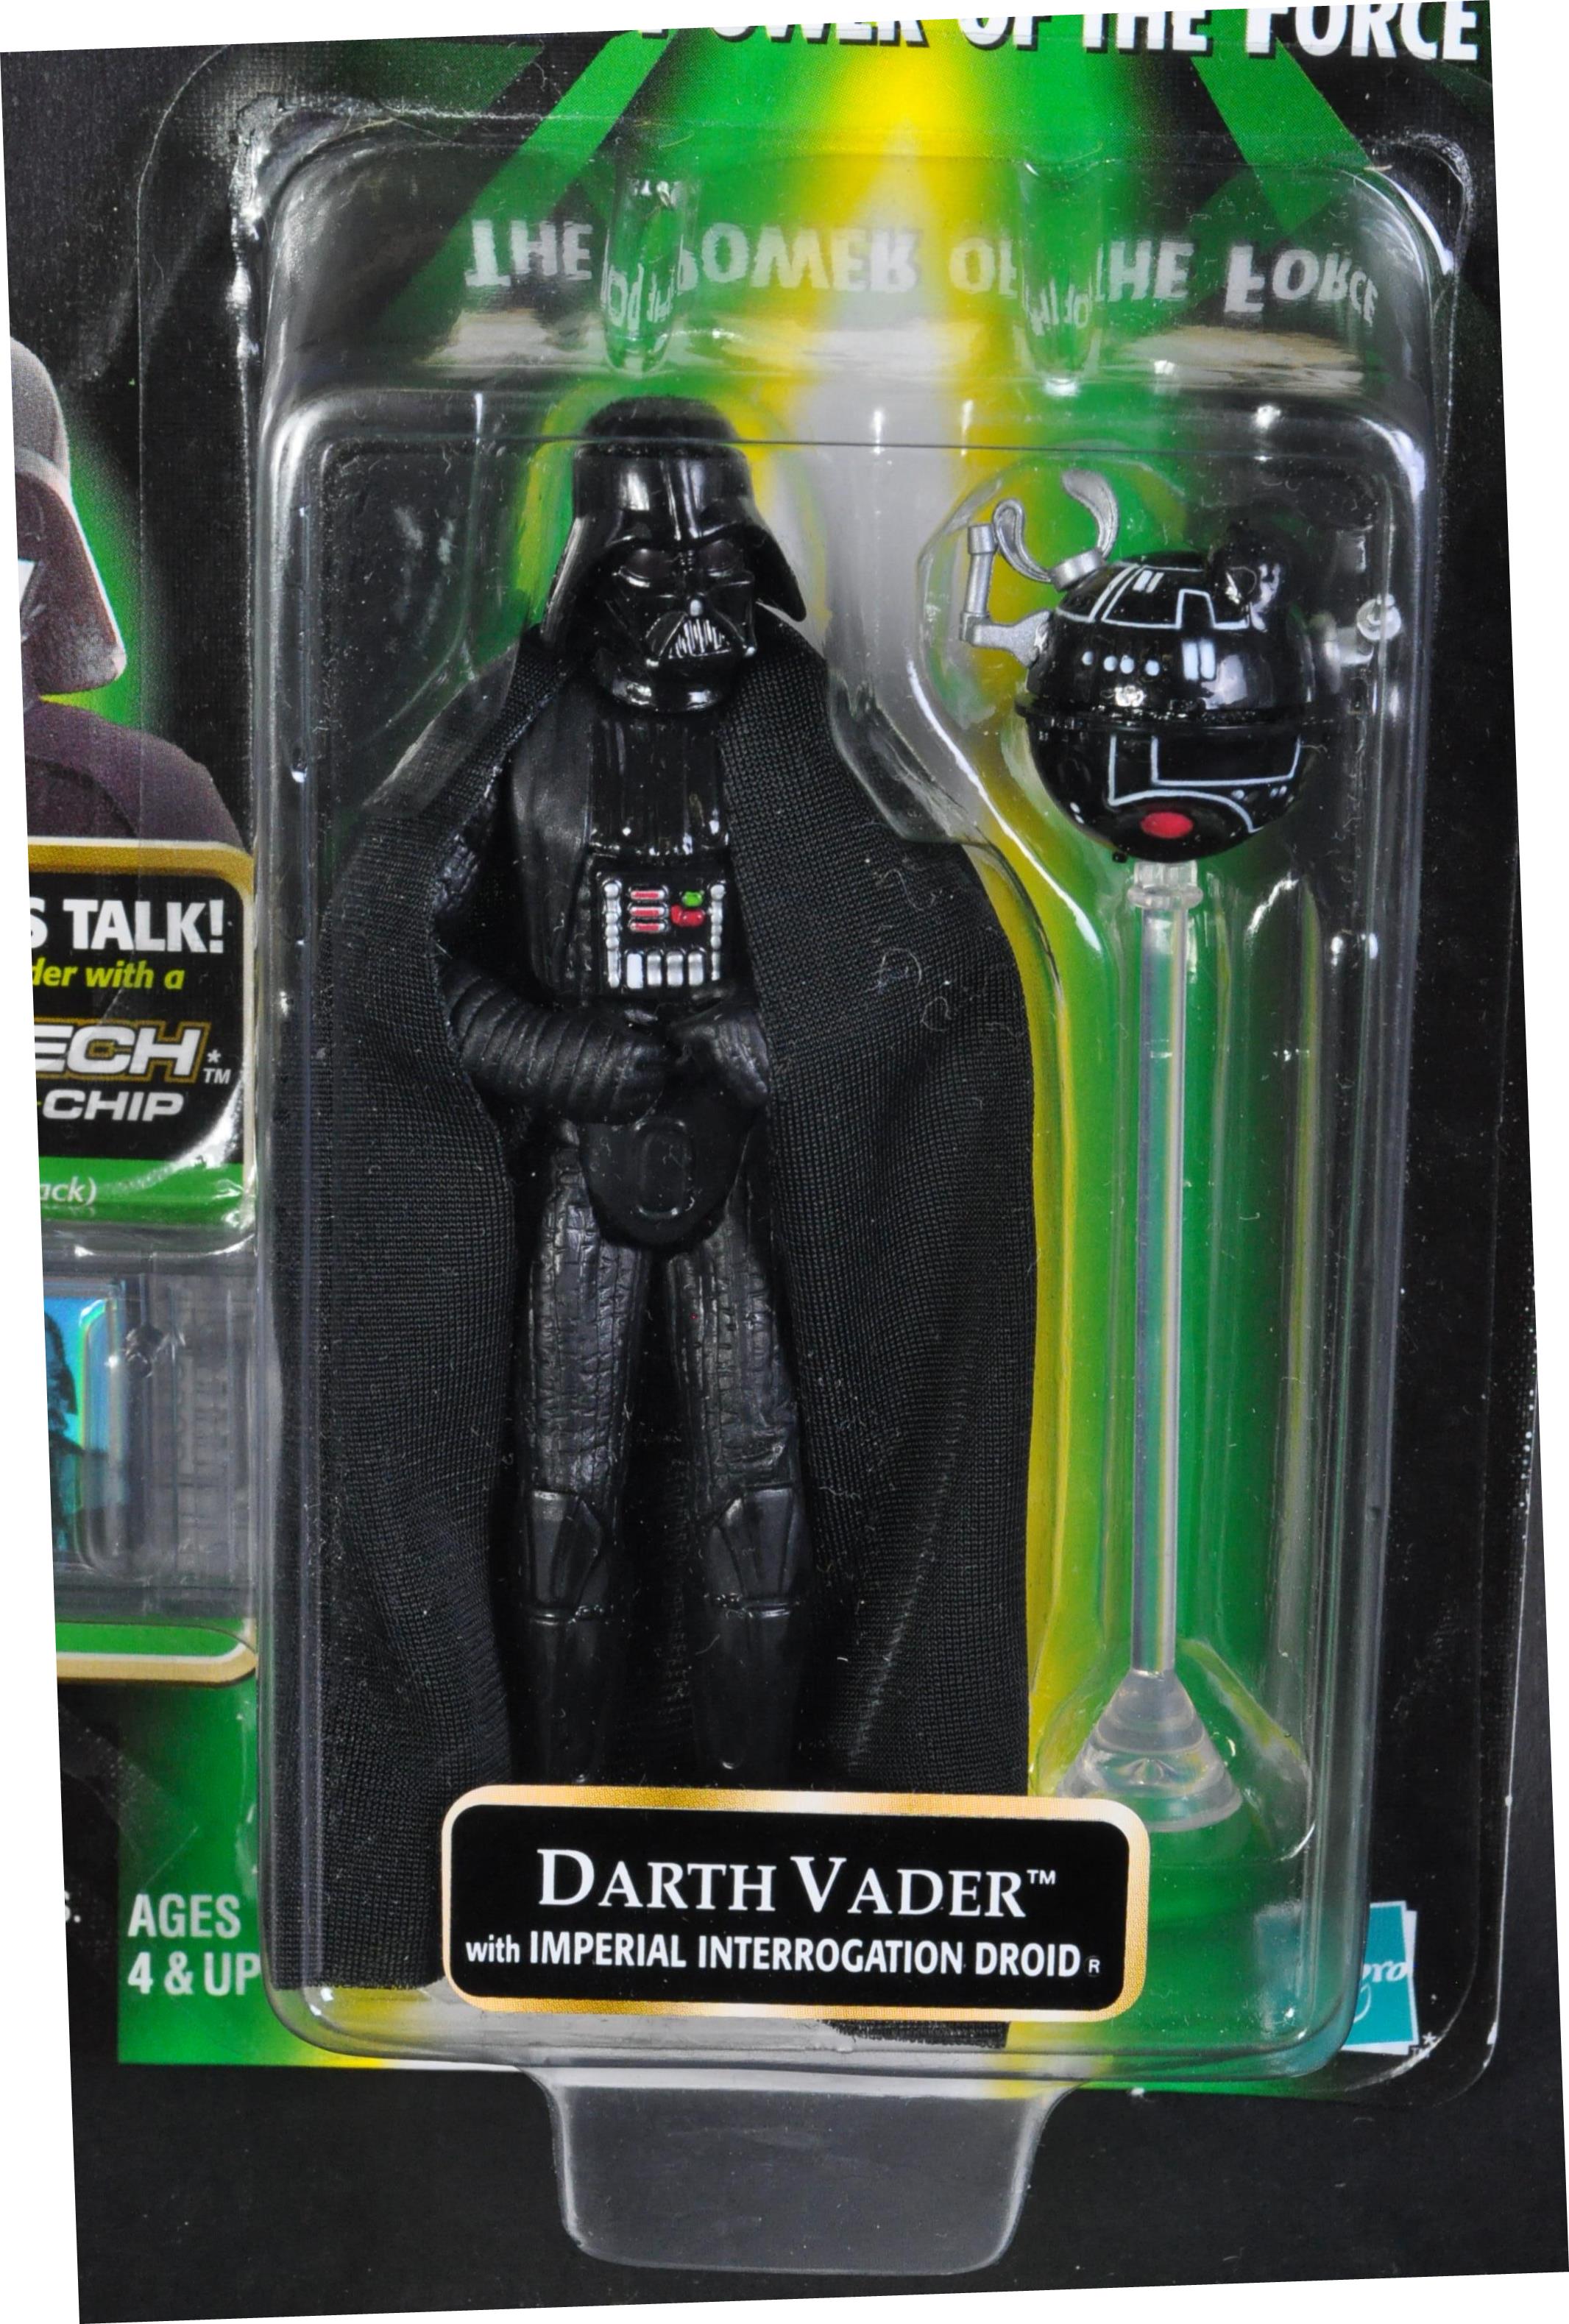 ESTATE OF DAVE PROWSE - STAR WARS POWER OF THE FORCE HASBRO FIGURE - Image 2 of 4